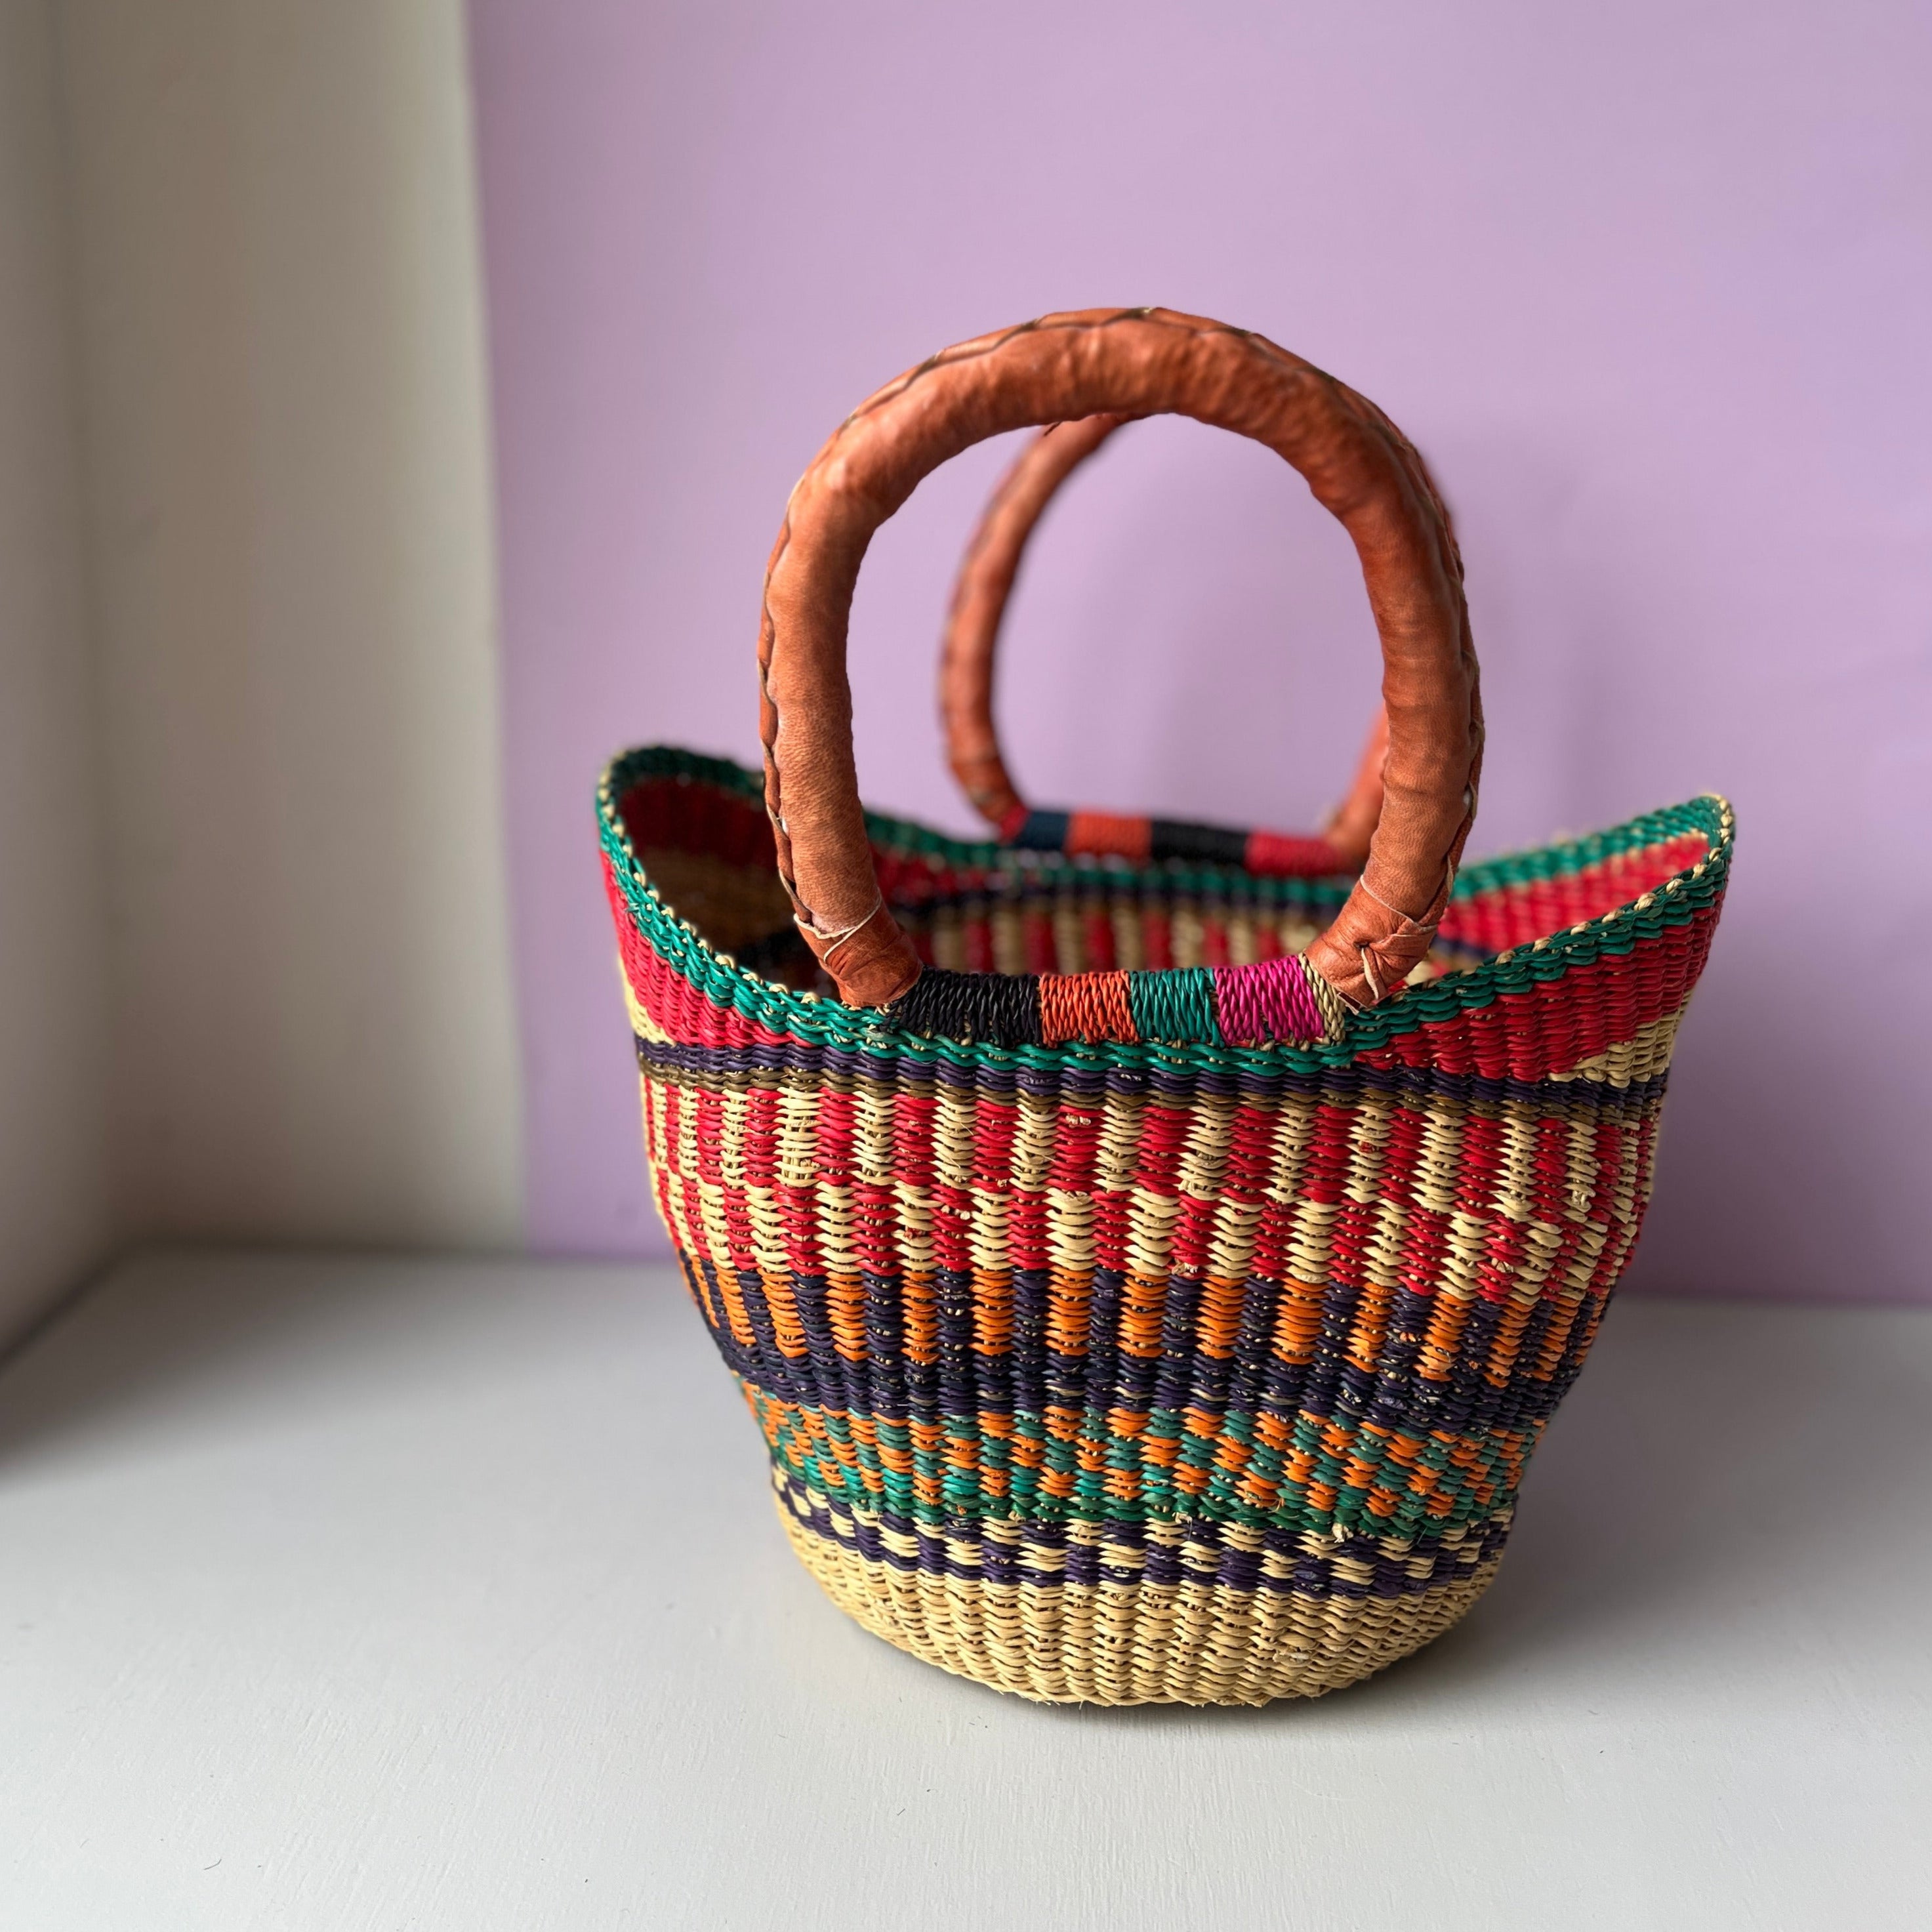 Seagrass basket middle No. 5